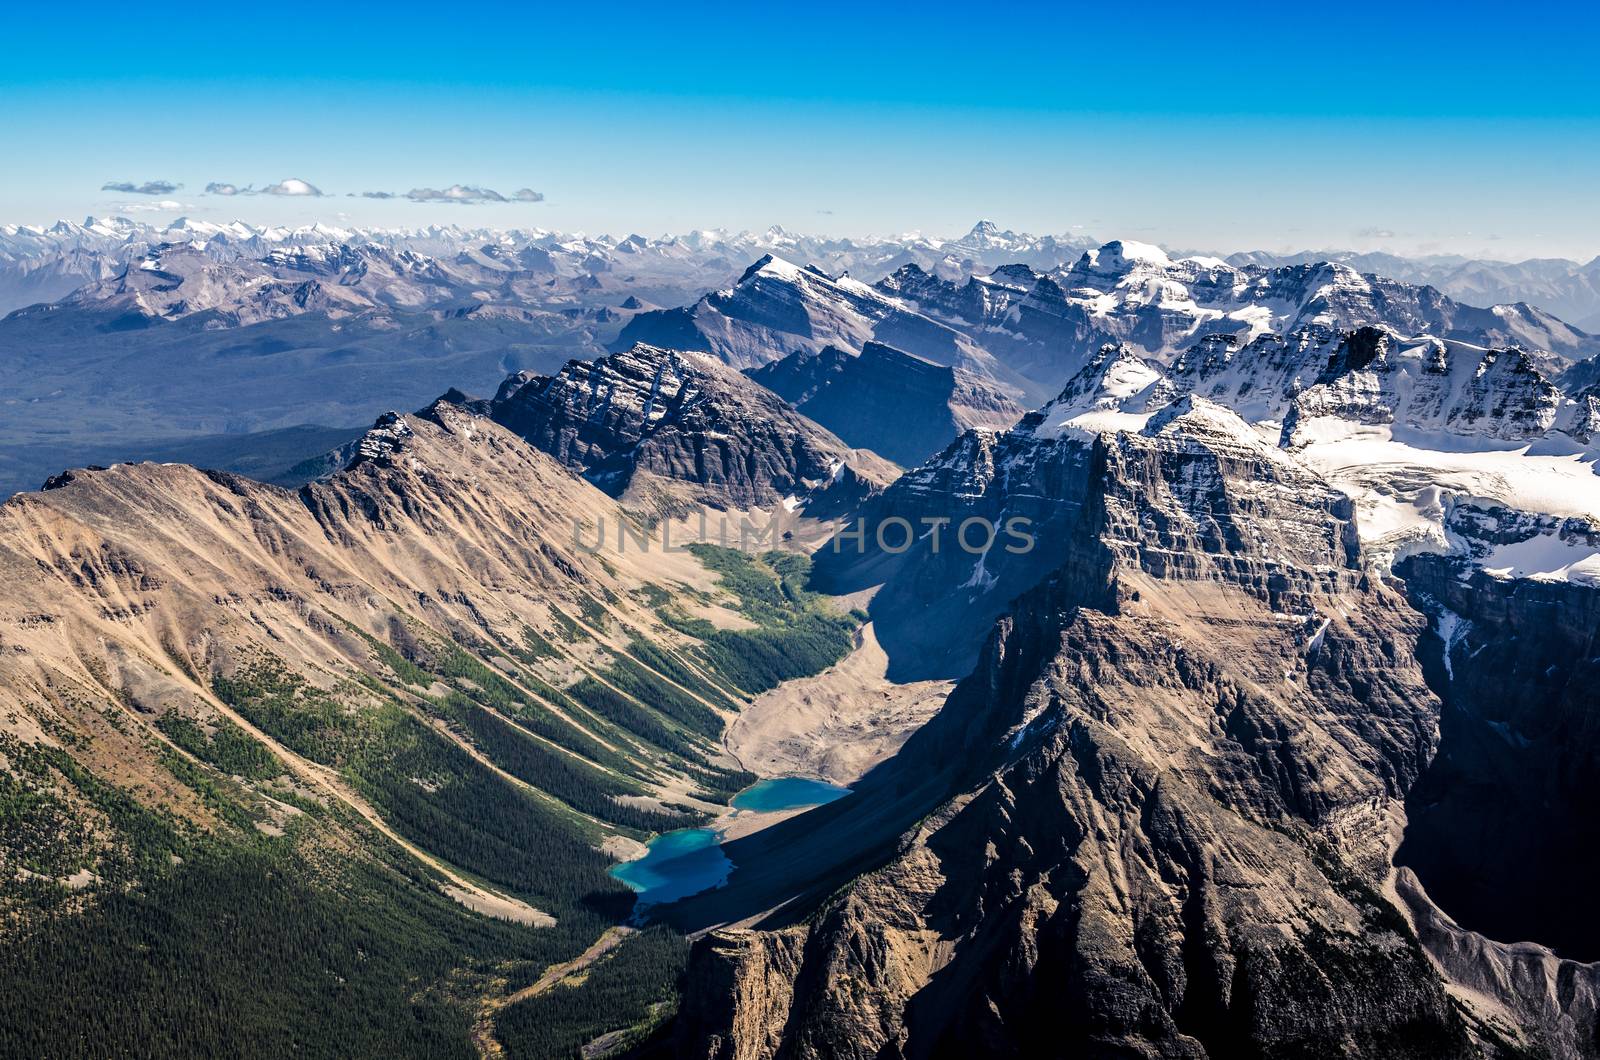 Mountain range view from Mt Temple, Banff NP, Alberta, Canada by martinm303